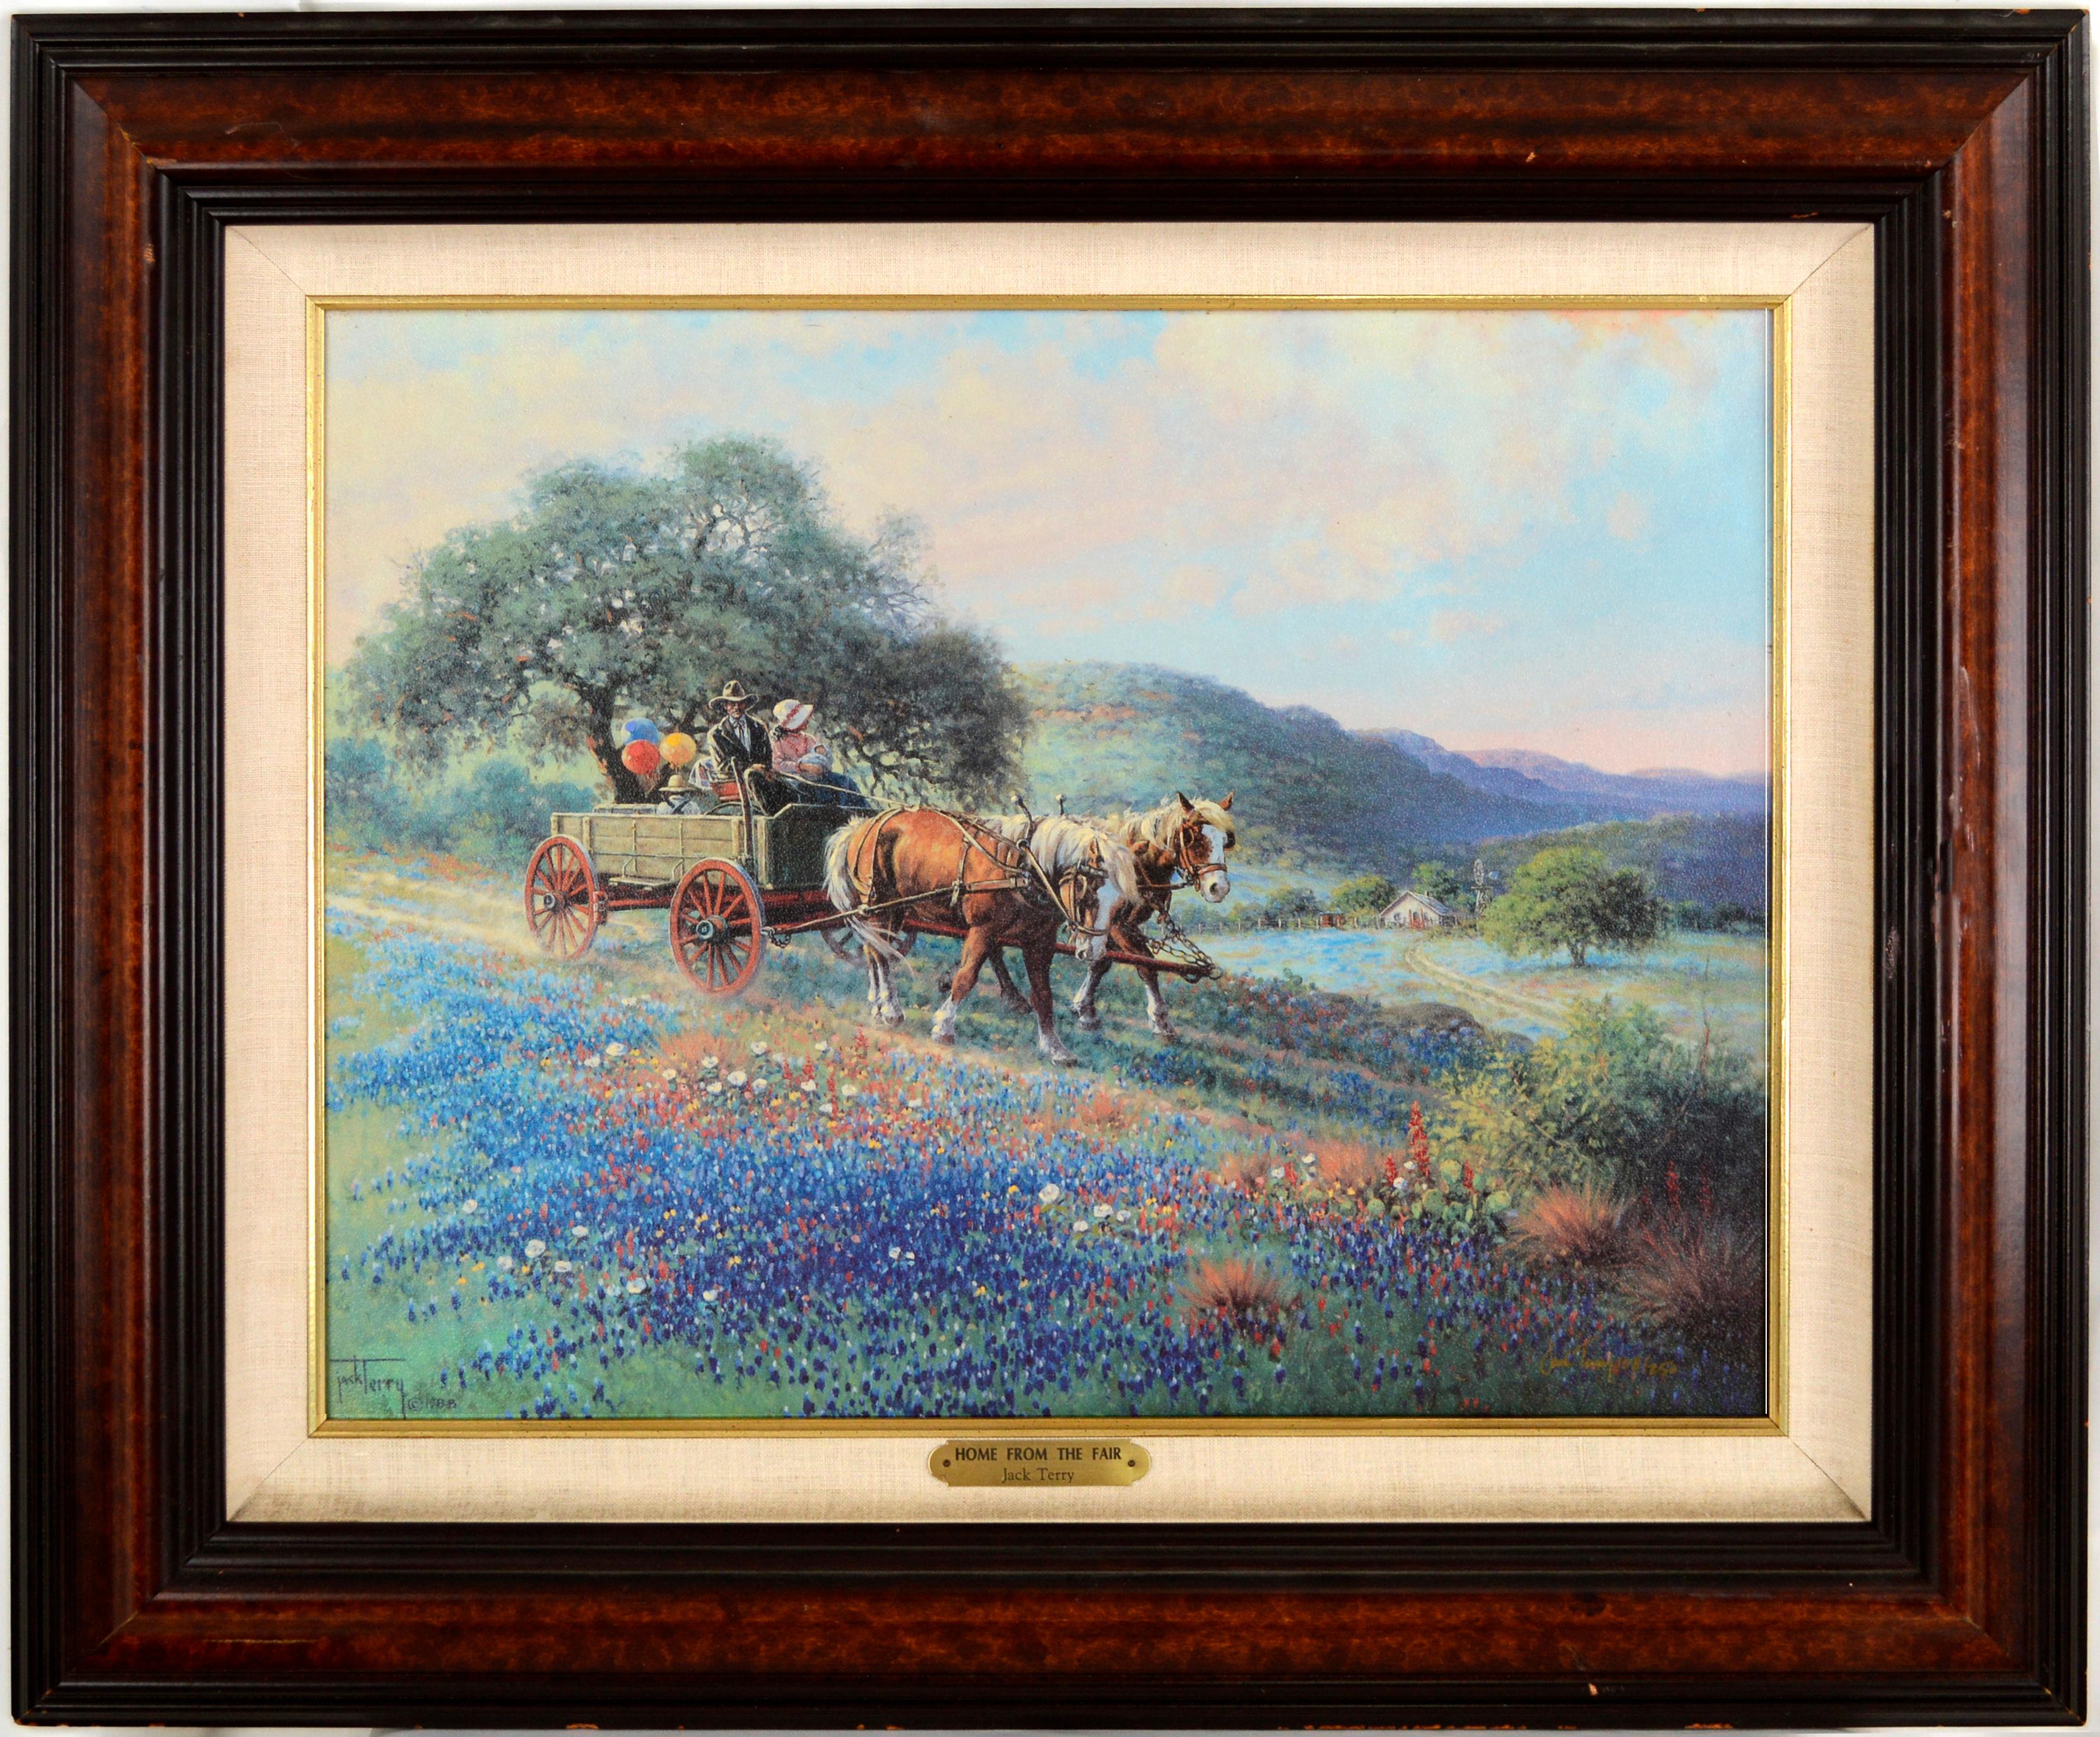 Jack Terry Figurative Print - "Home from the Fair" Wagon and Horses Print on Canvas